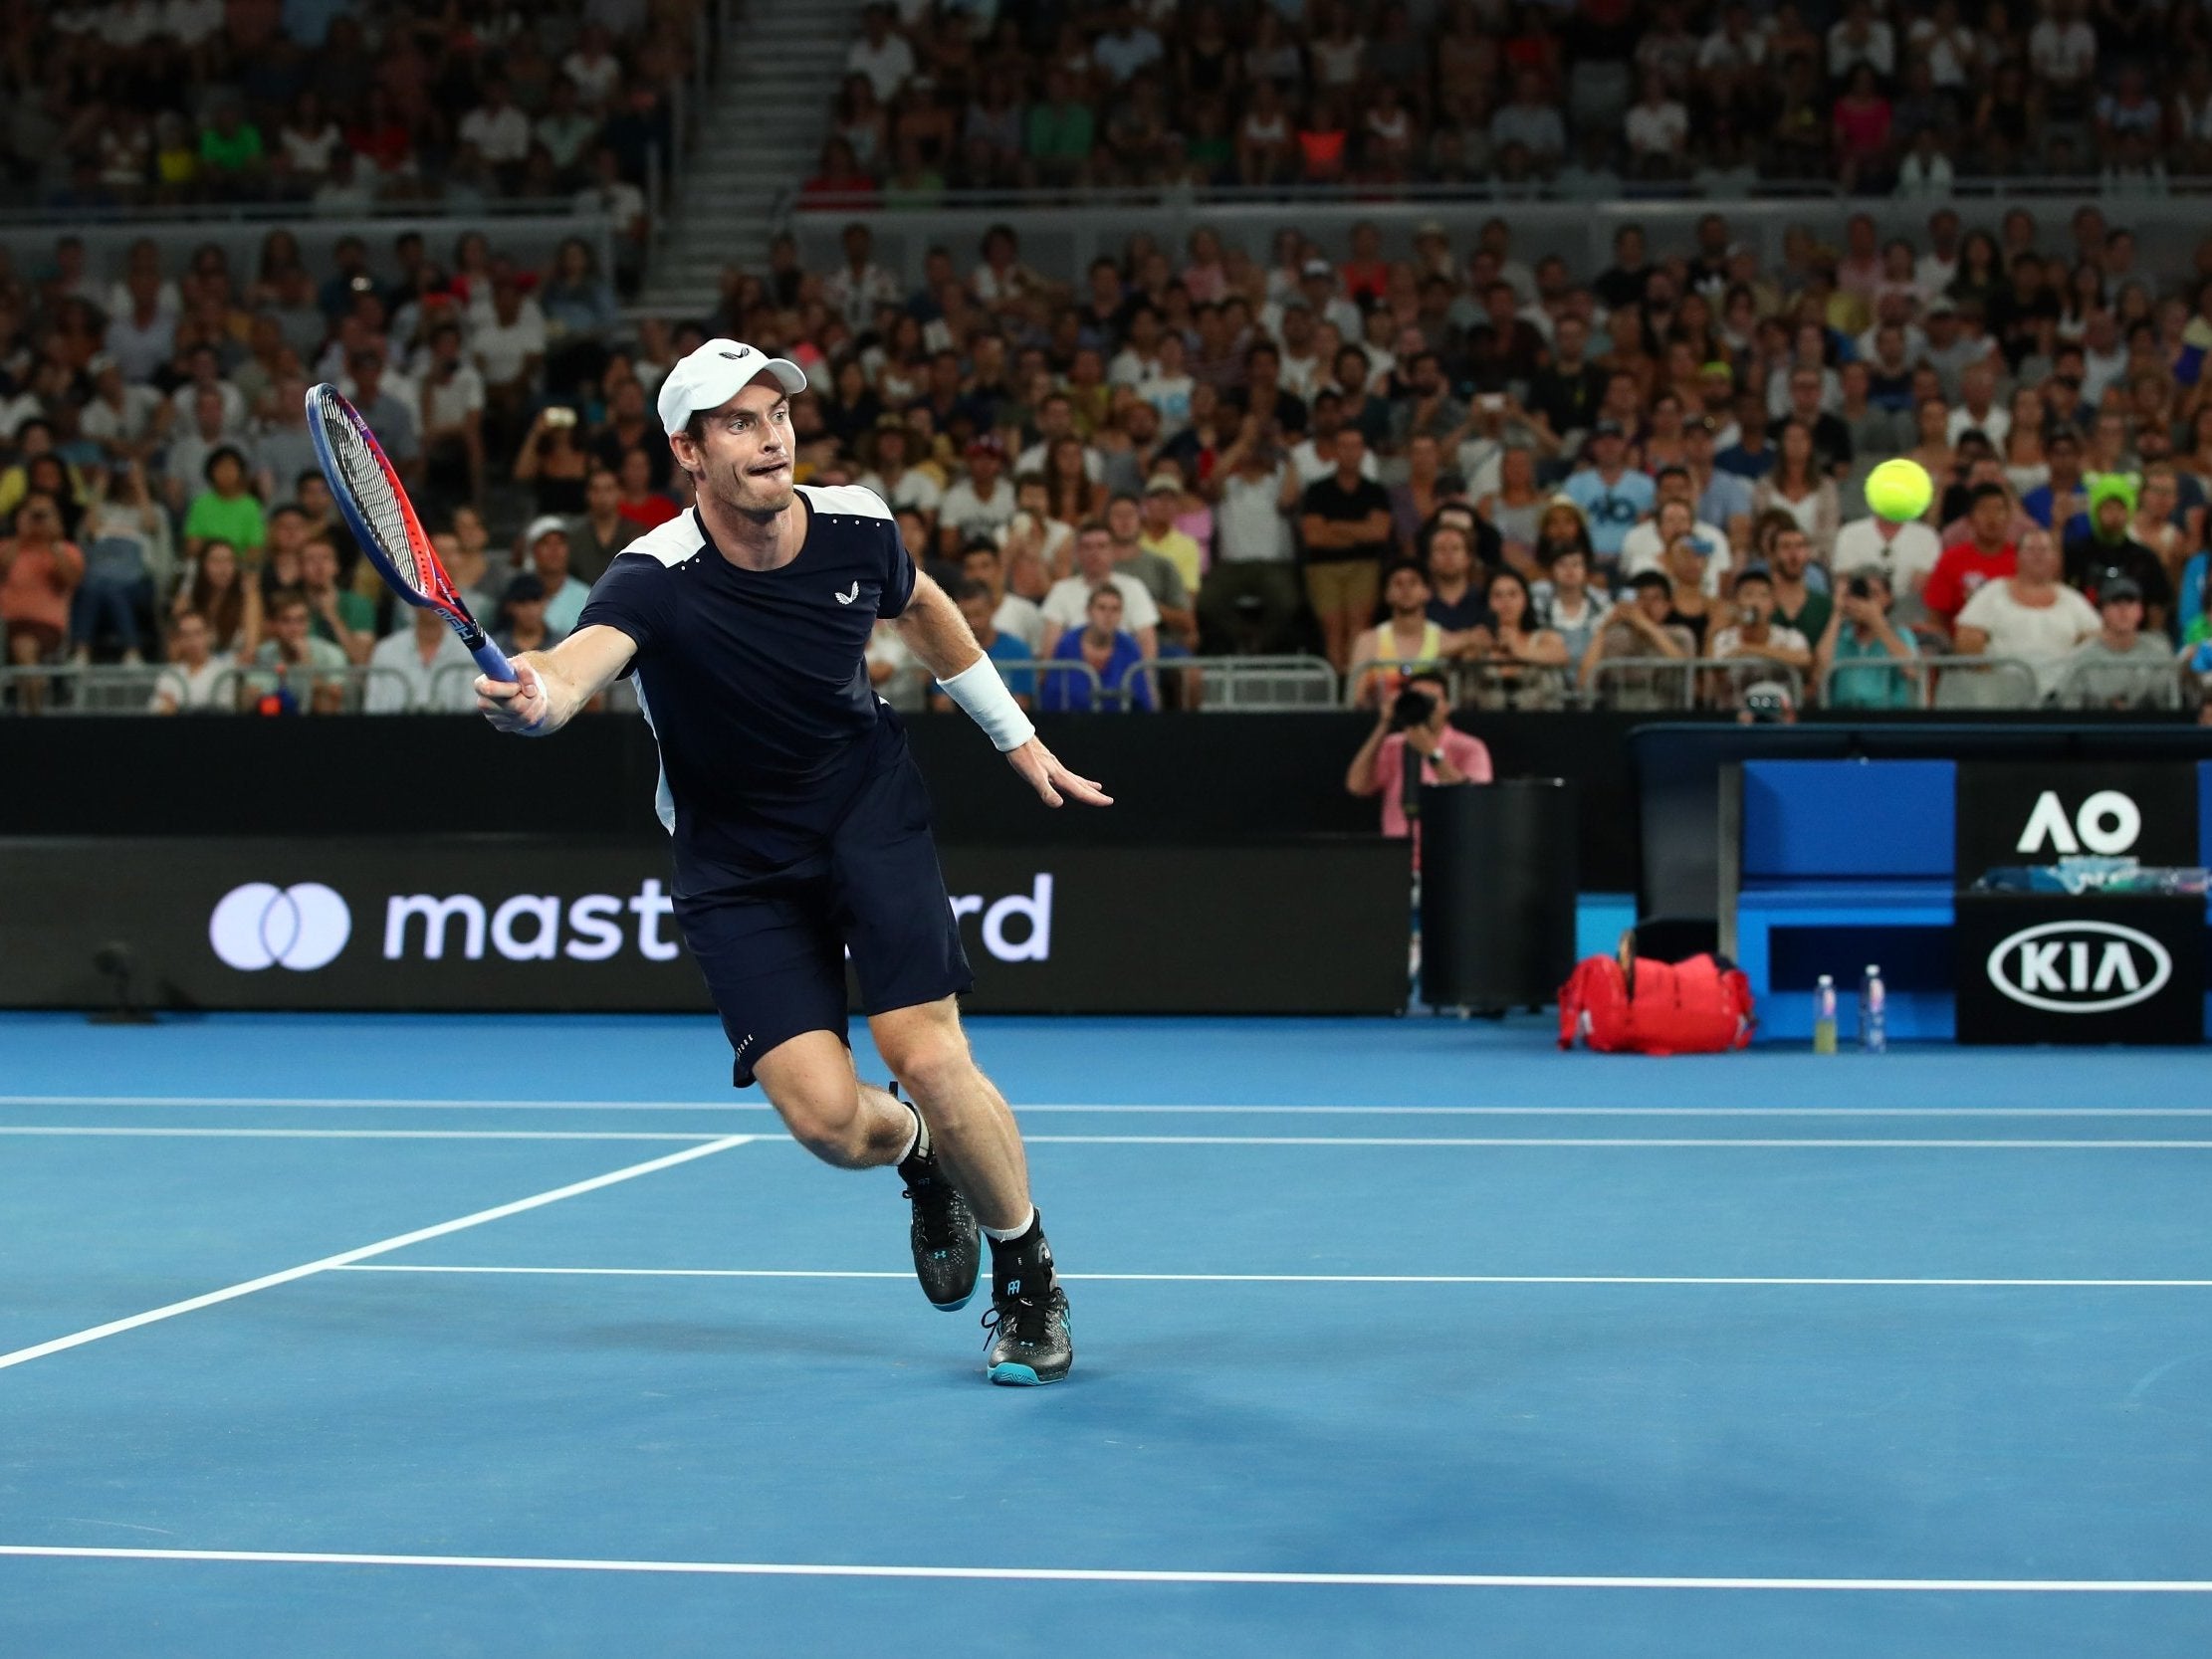 Murray showed great resilience and fight in his opening-round defeat in Melbourne